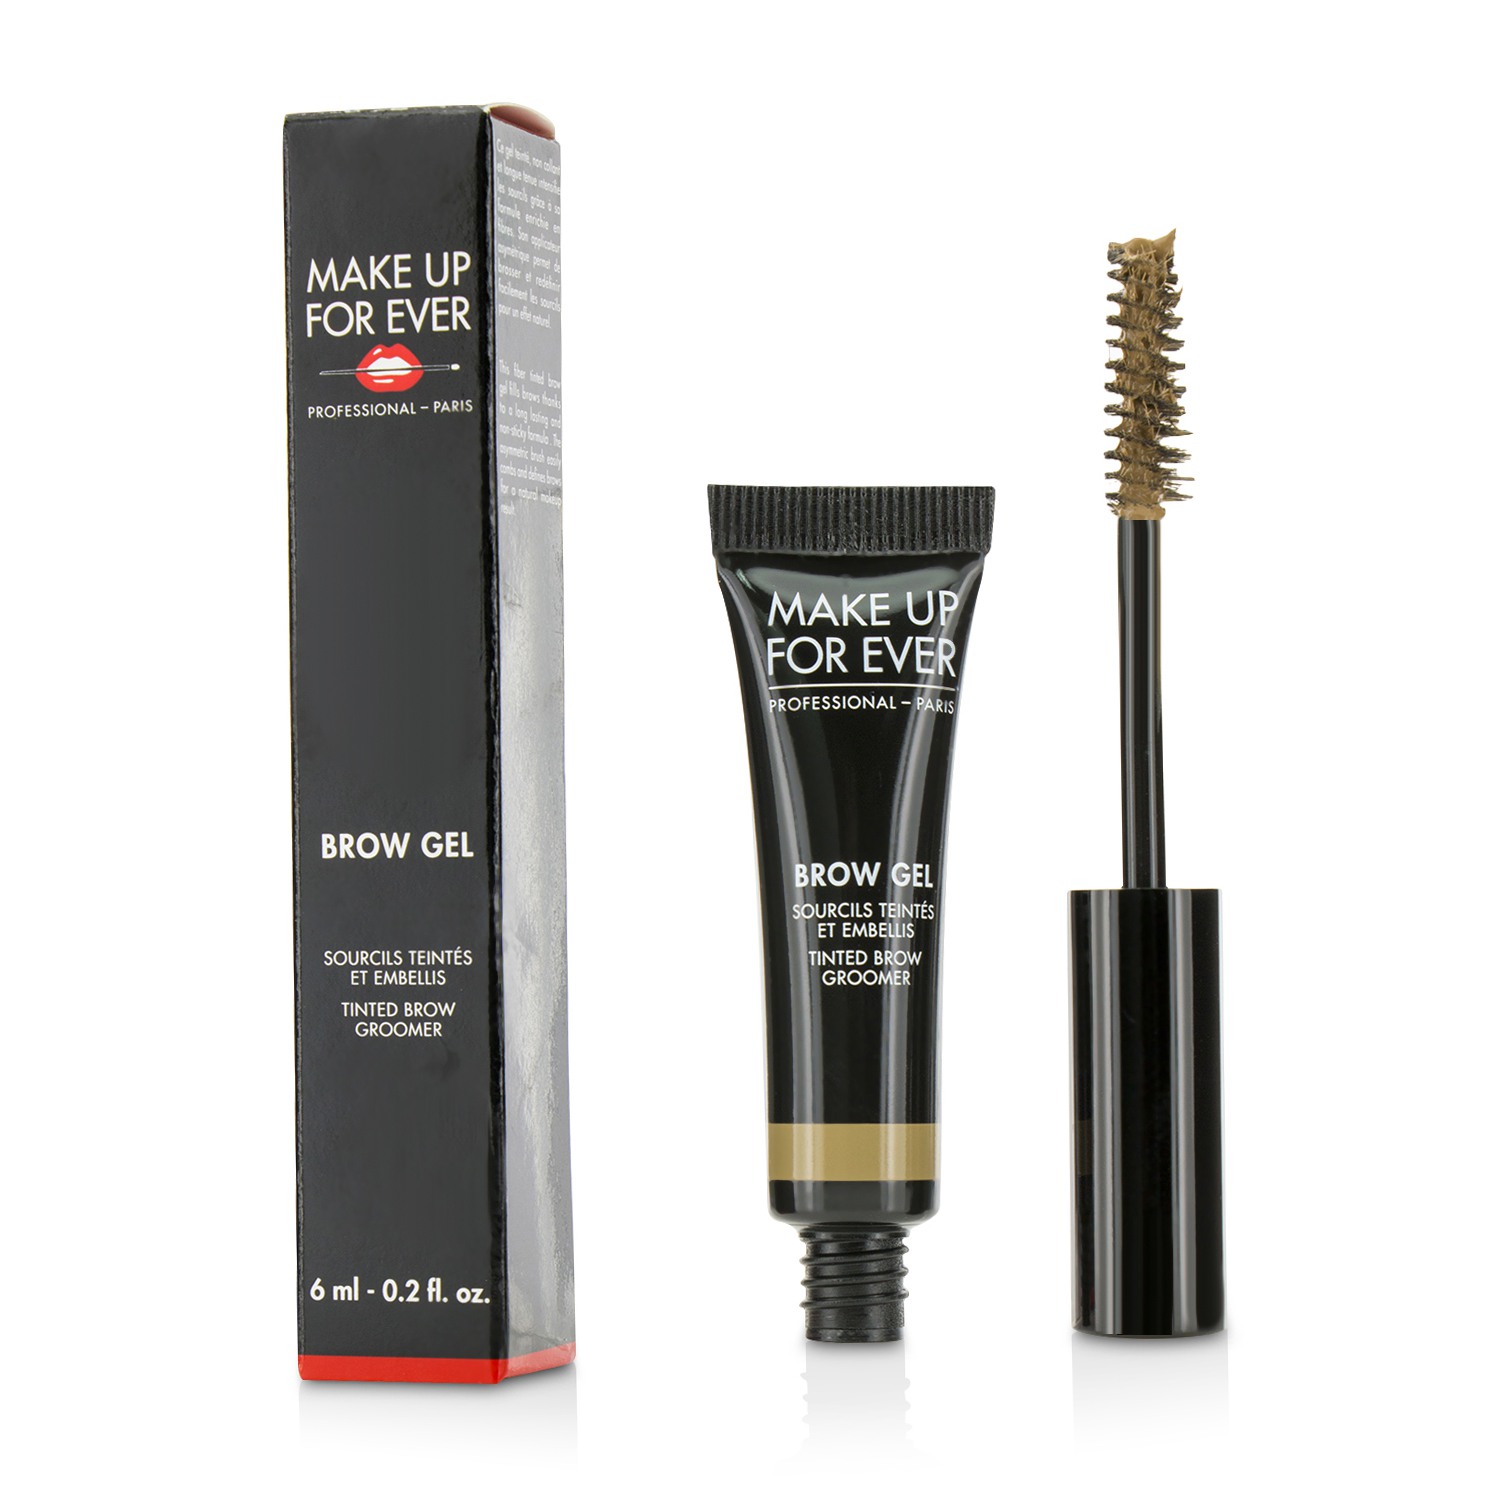 Brow Gel Tinted Brow Groomer - # 25 (Dark Blond) Make Up For Ever Image